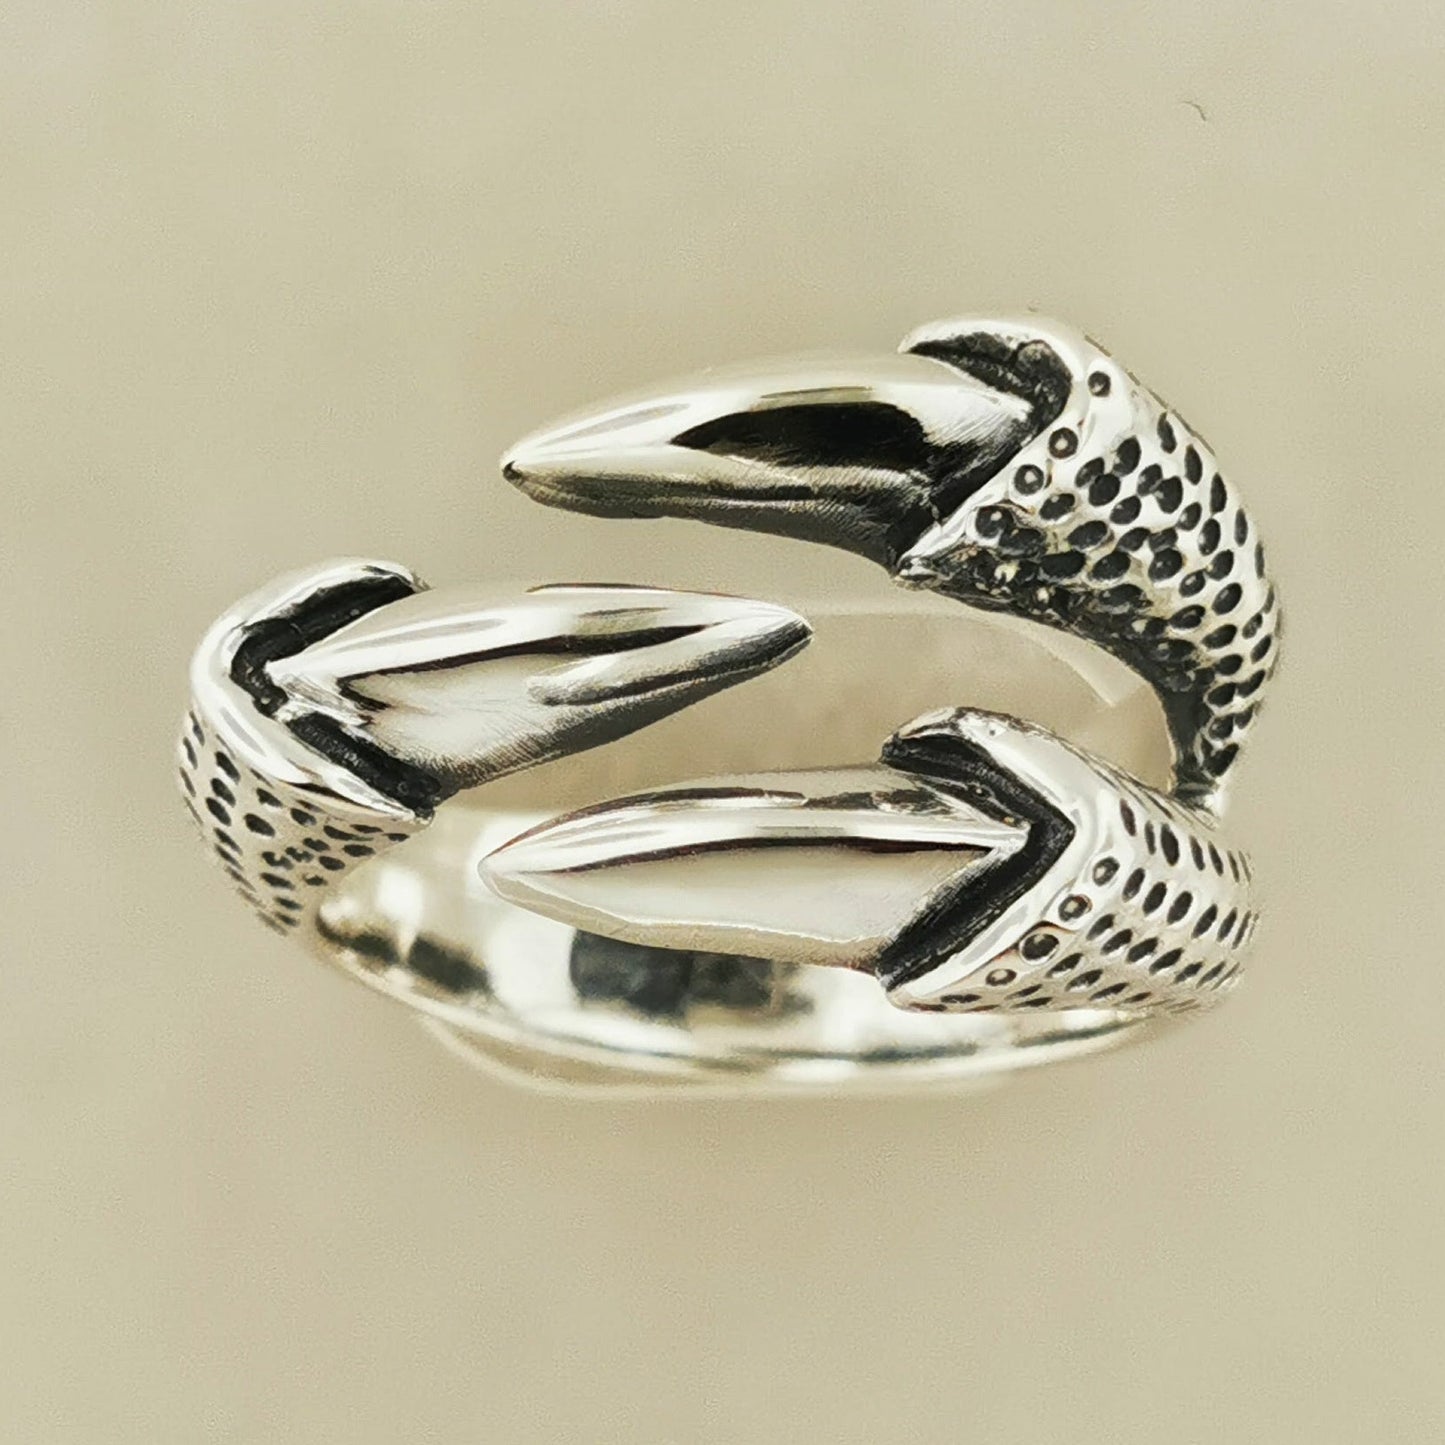 Adjustable Dragon Claw Ring in Sterling Silver